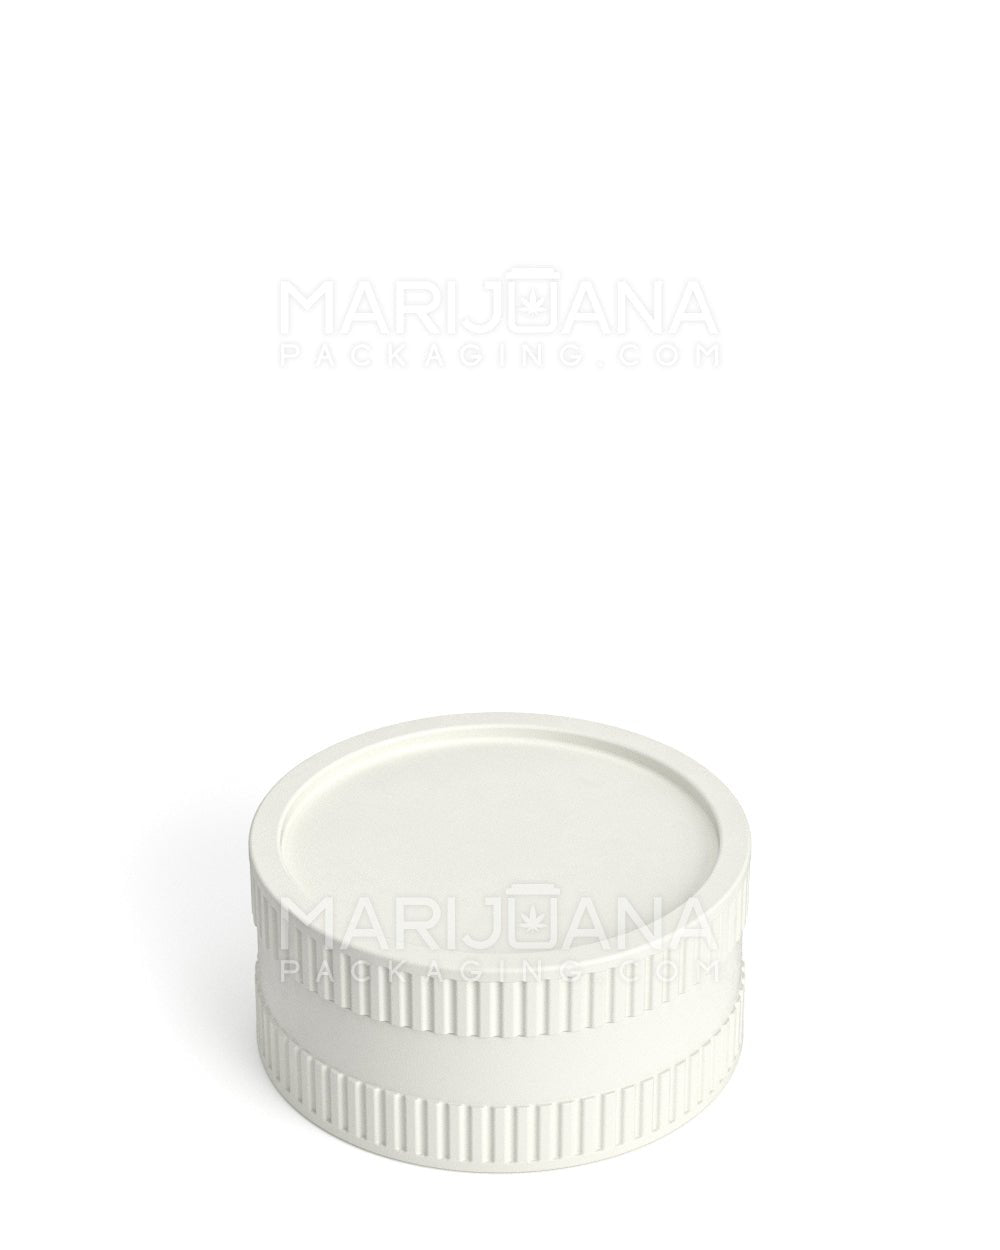 Biodegradable Thick Wall White Grinder | 2 Piece - 55mm - 12 Count - 4